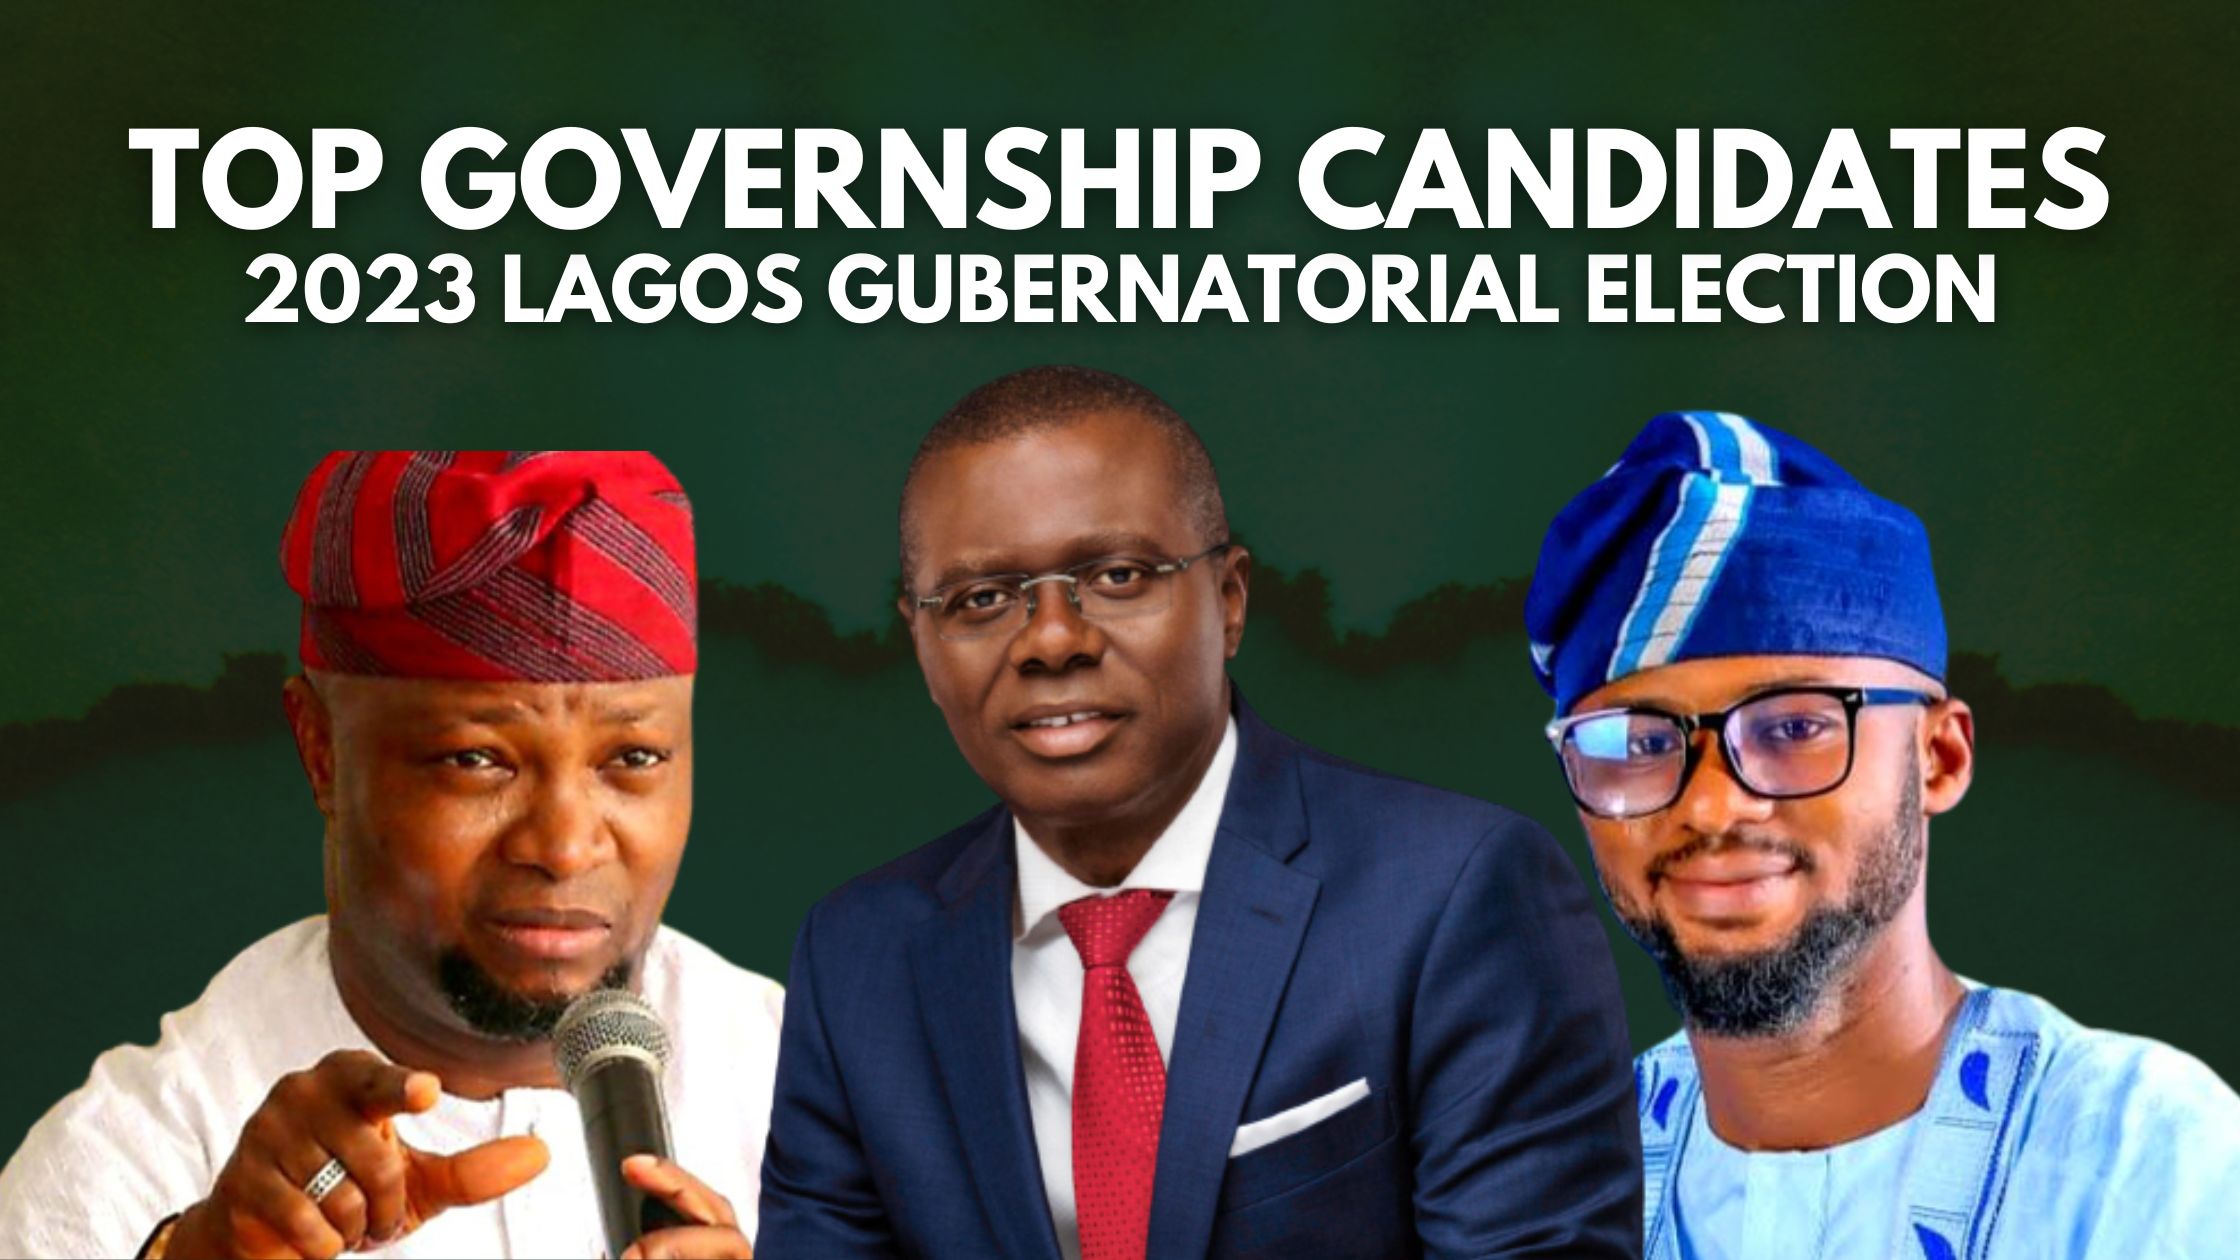 2023 Election Top 3 Governorship Candidates in Lagos State